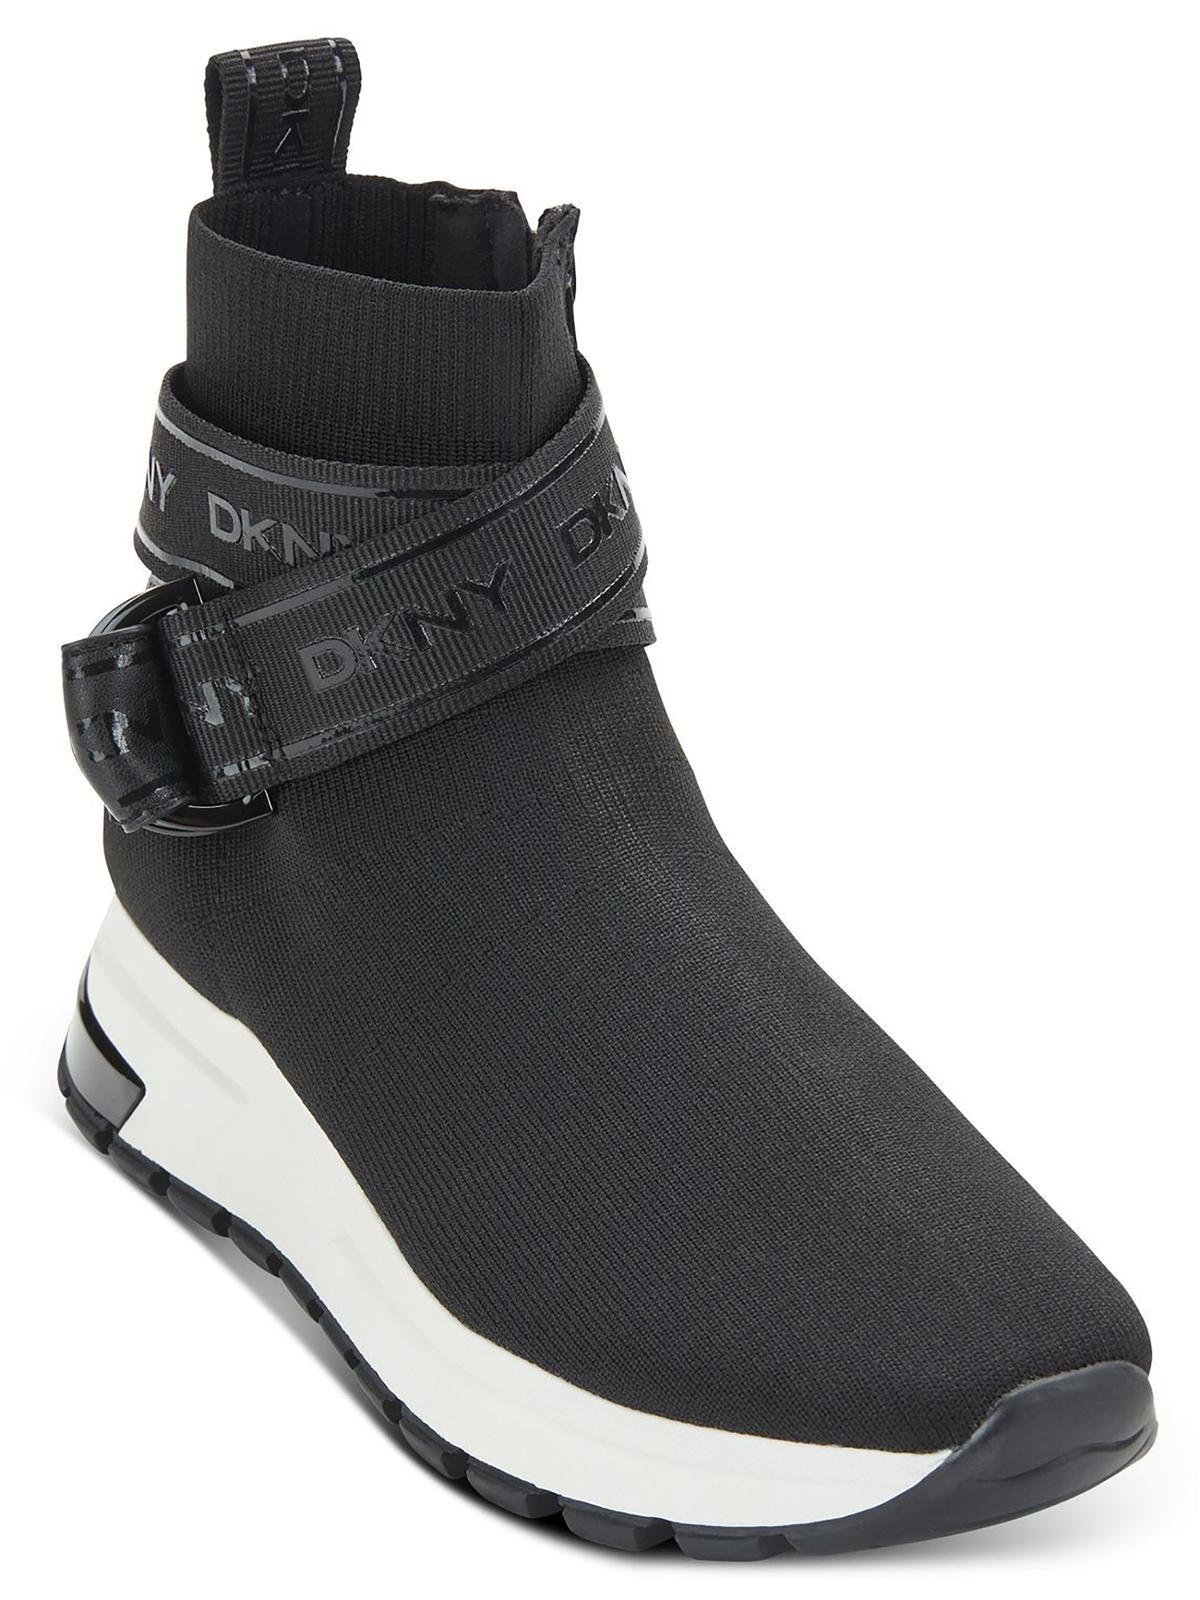 DKNY Miley Performance Lifestyle High-top Sneakers in Black | Lyst